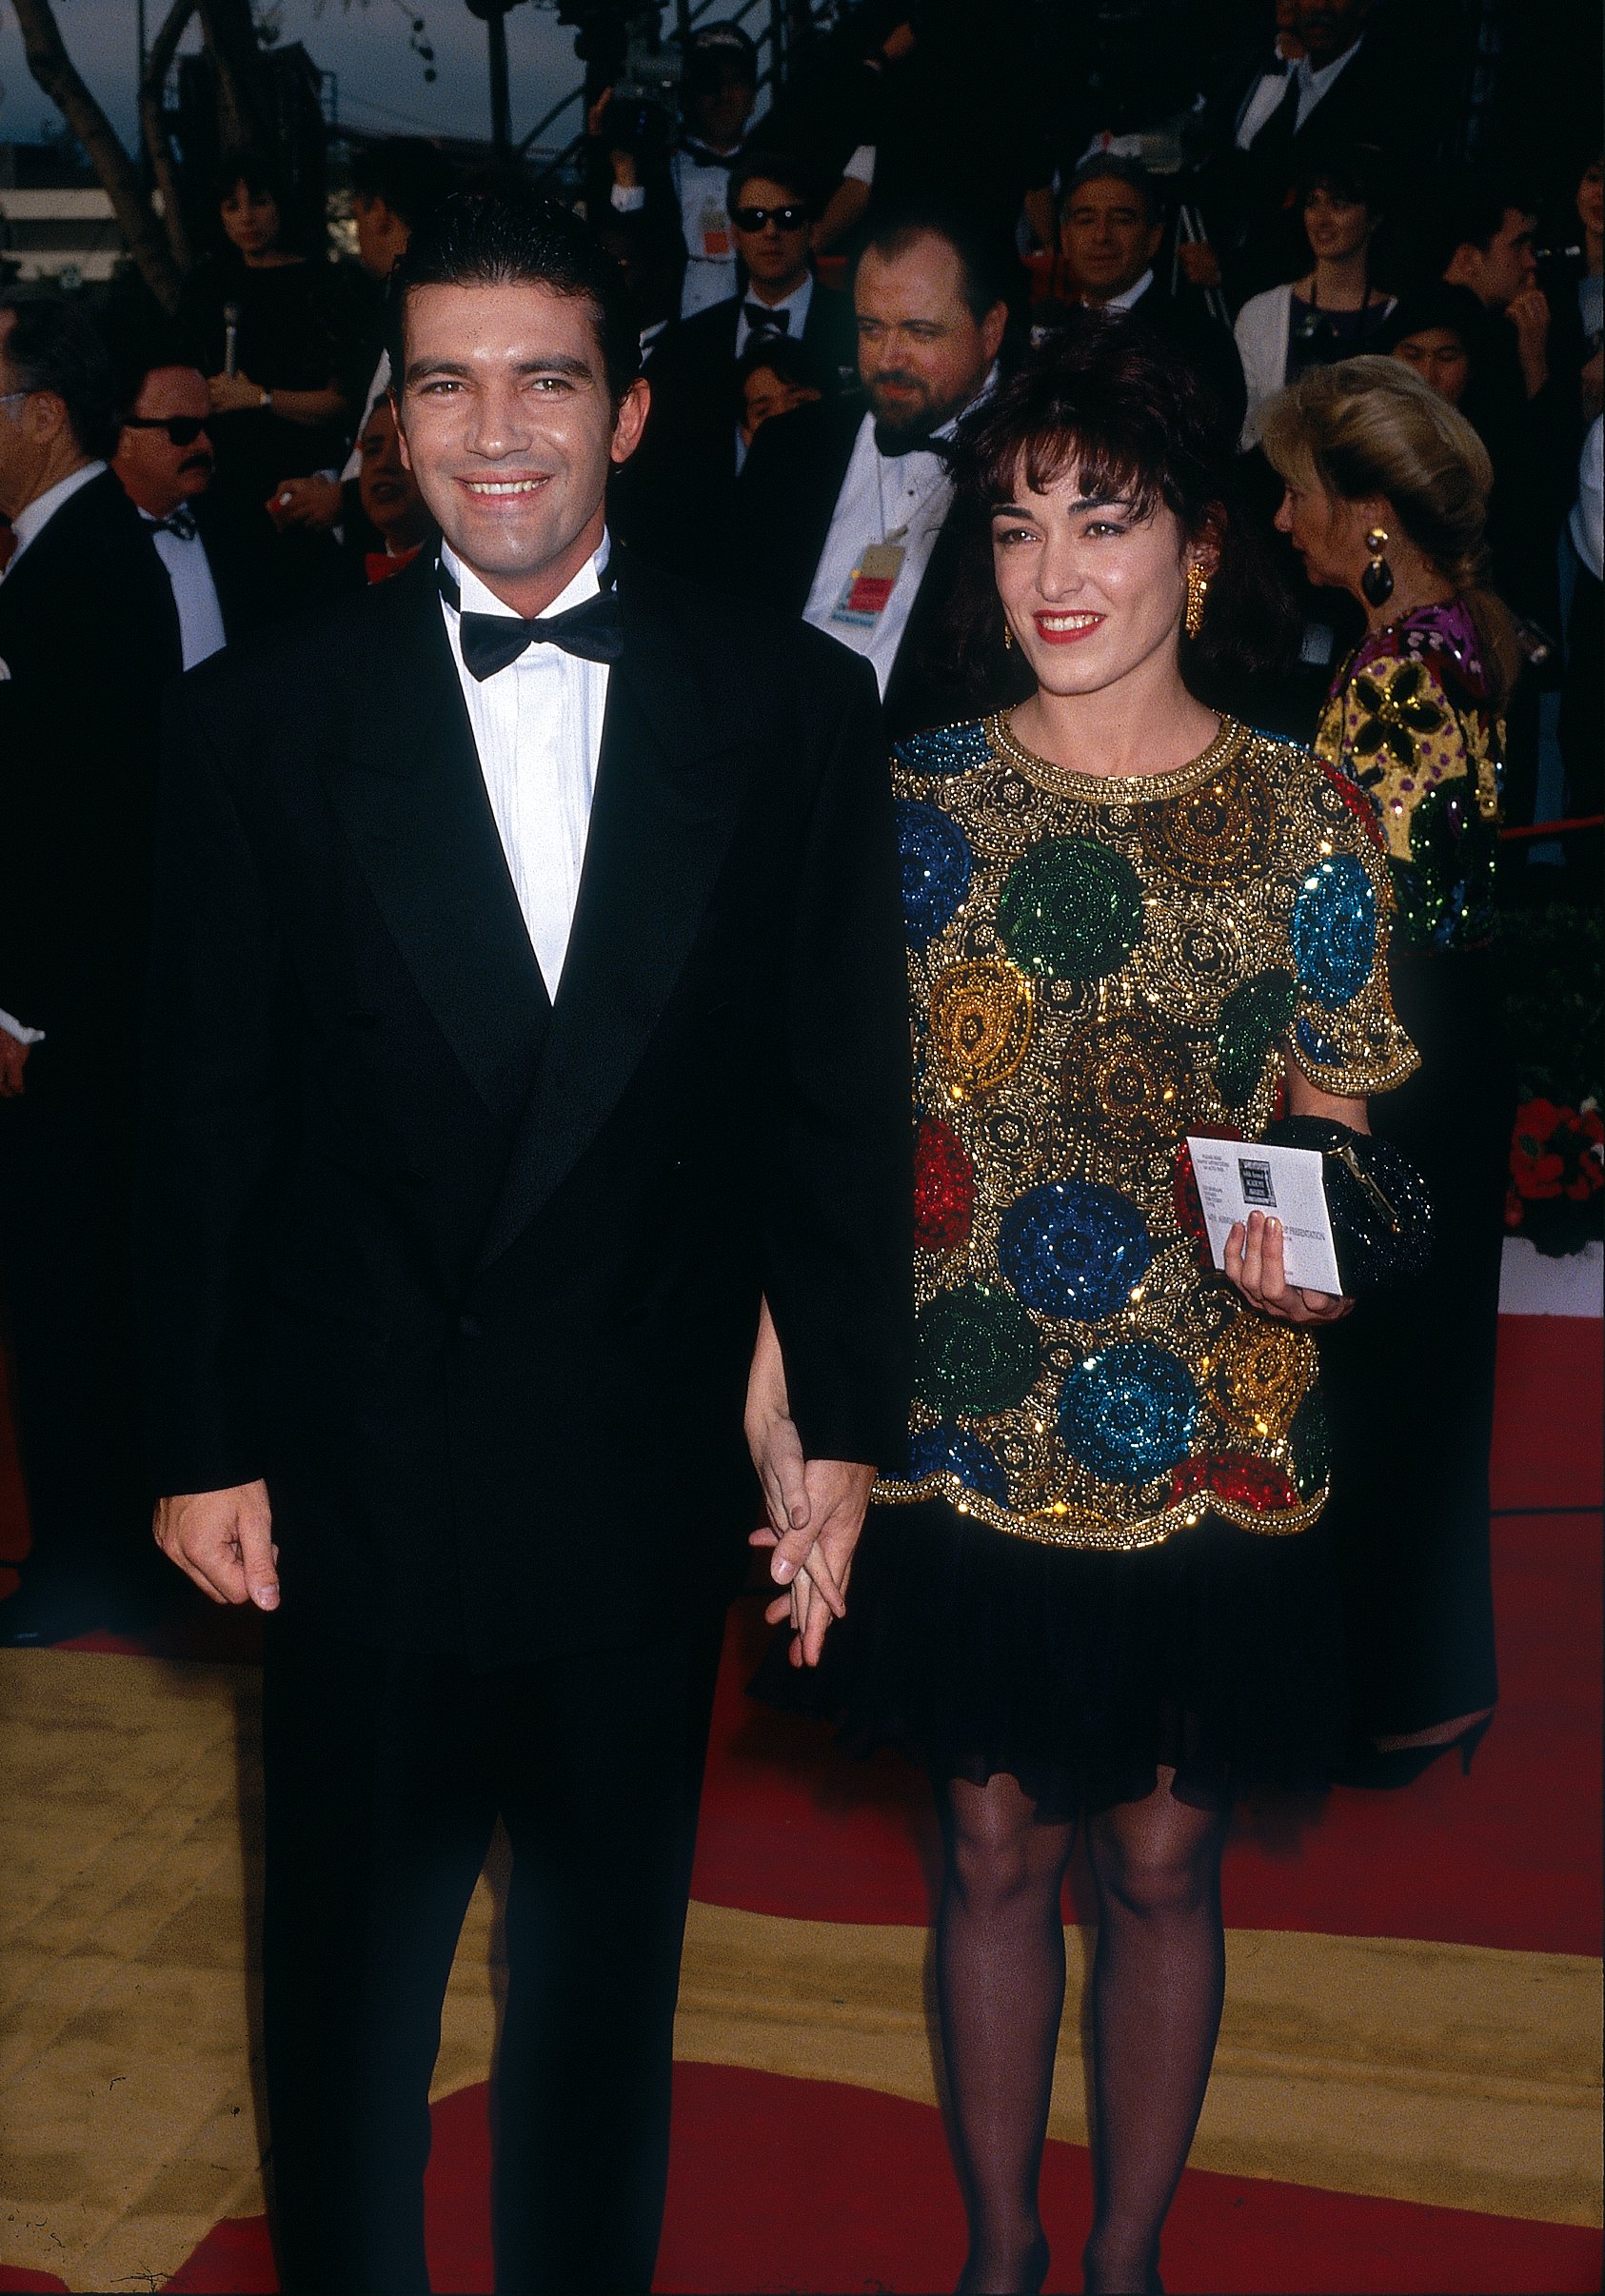  Antonio Banderas and Ana Leza are pictured as they arrive at the 1992 Academy Awards | Source: Getty Images